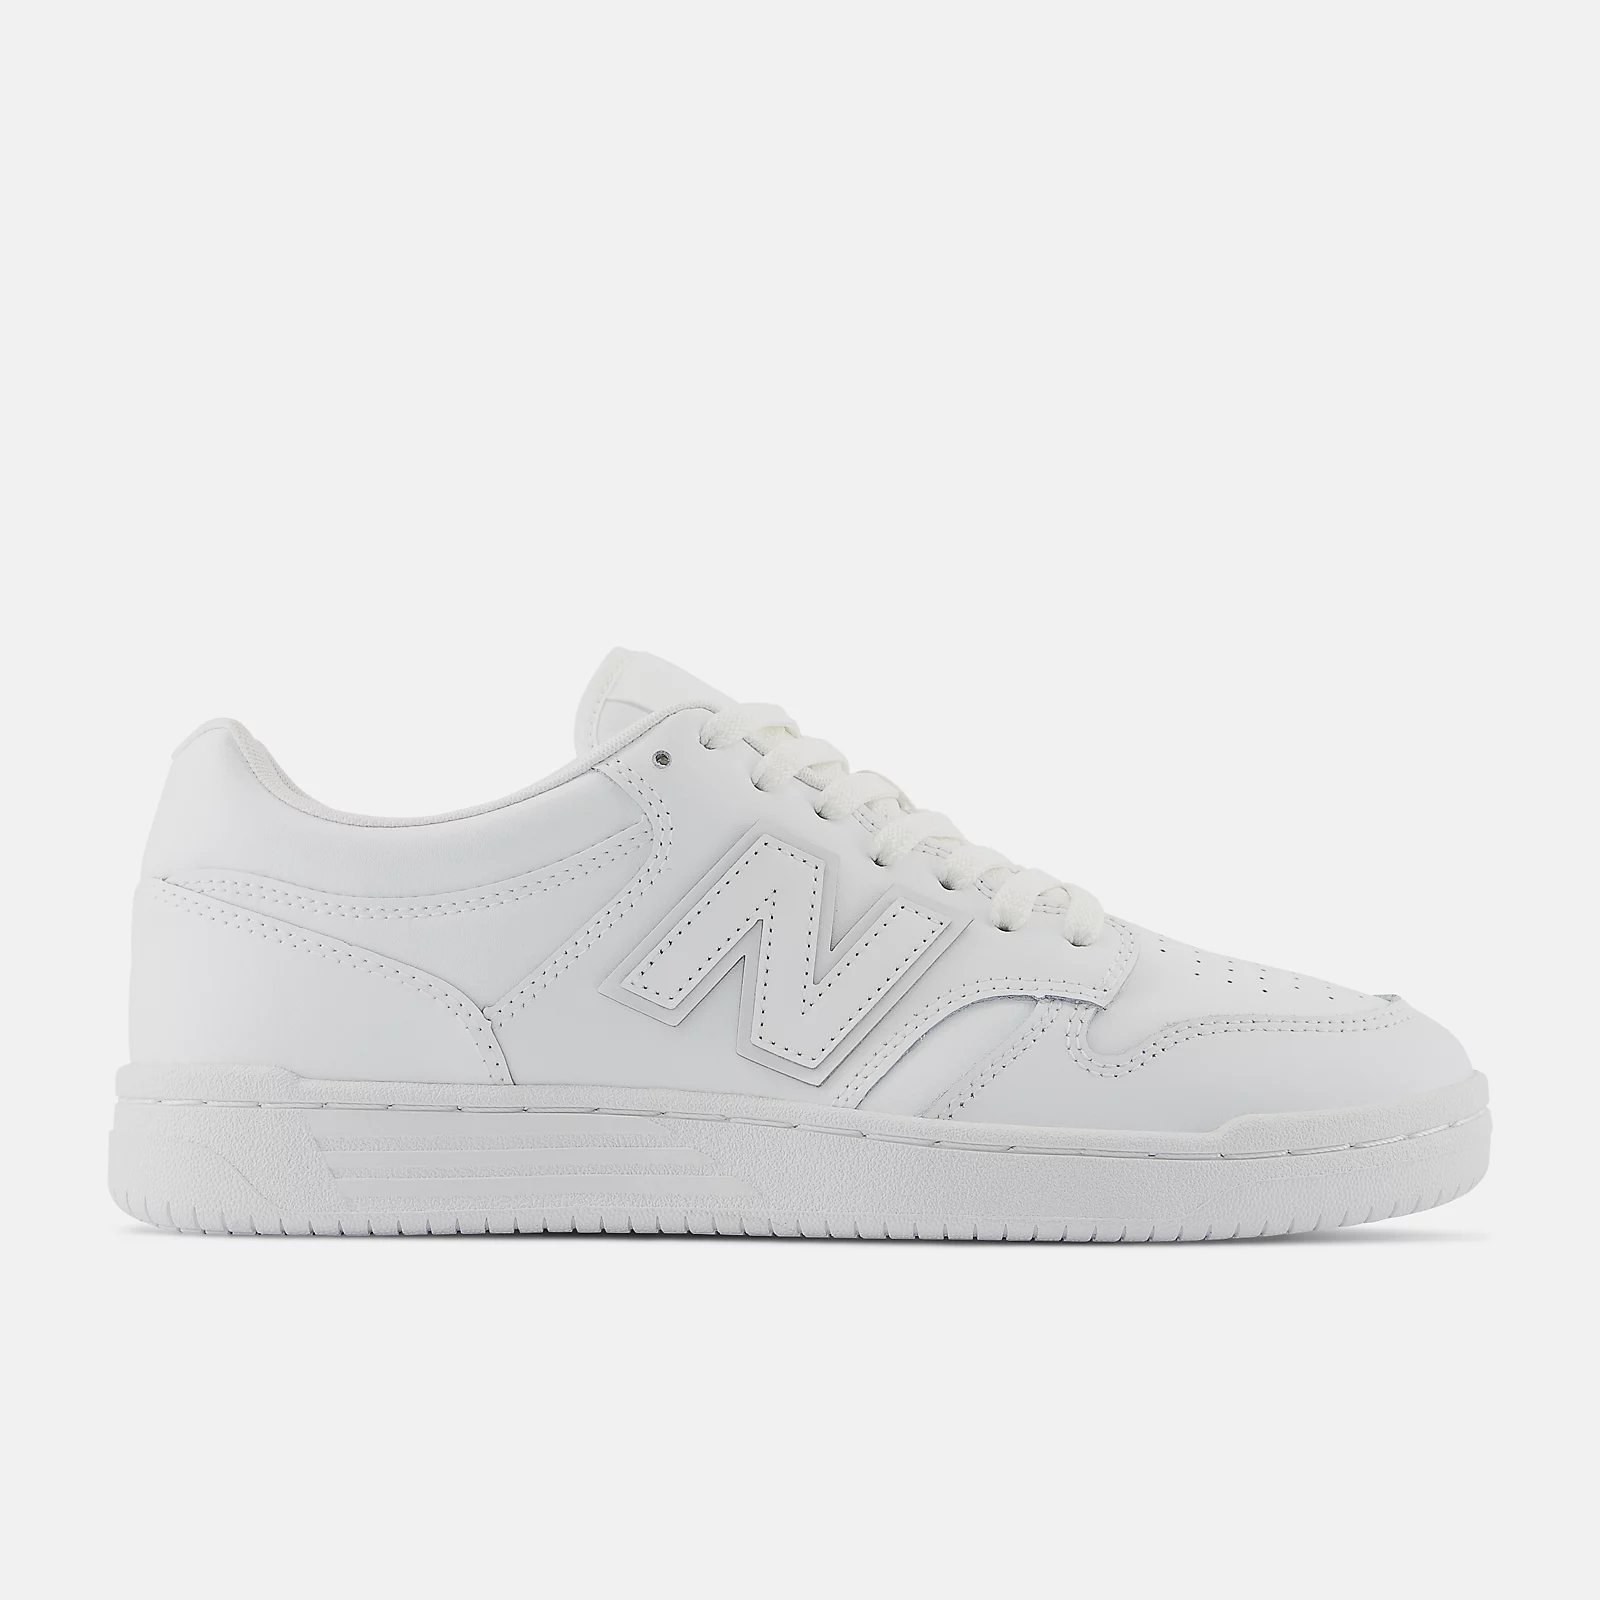 New Balance Store on Shopee is having massive discounts of Up to 50% ...